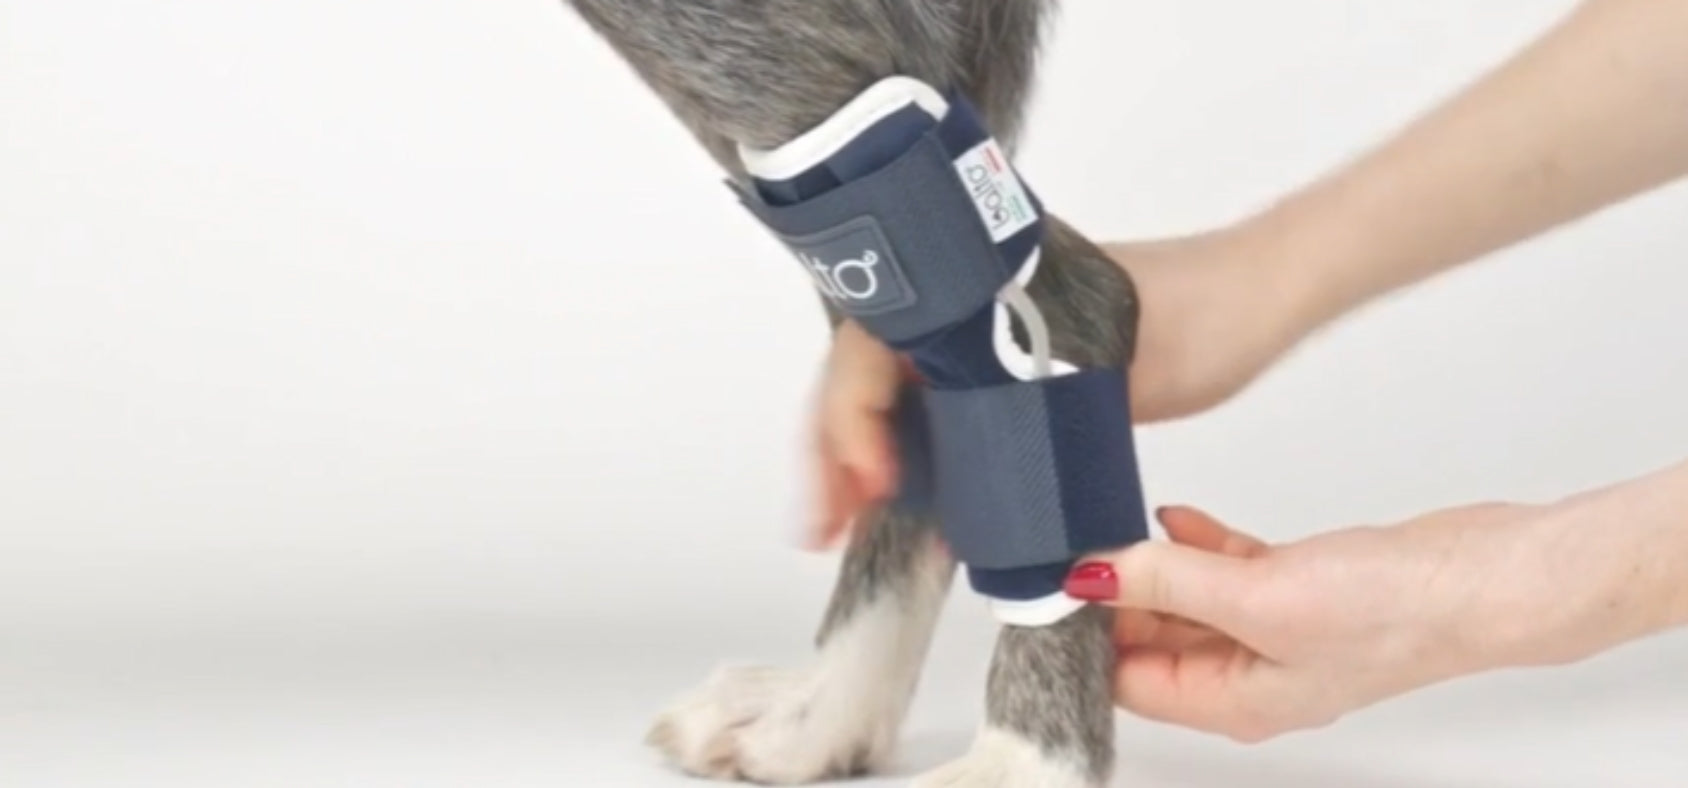 What Hock Splint or Hock Wrap Is Best for My Dog After a Hock Injury?